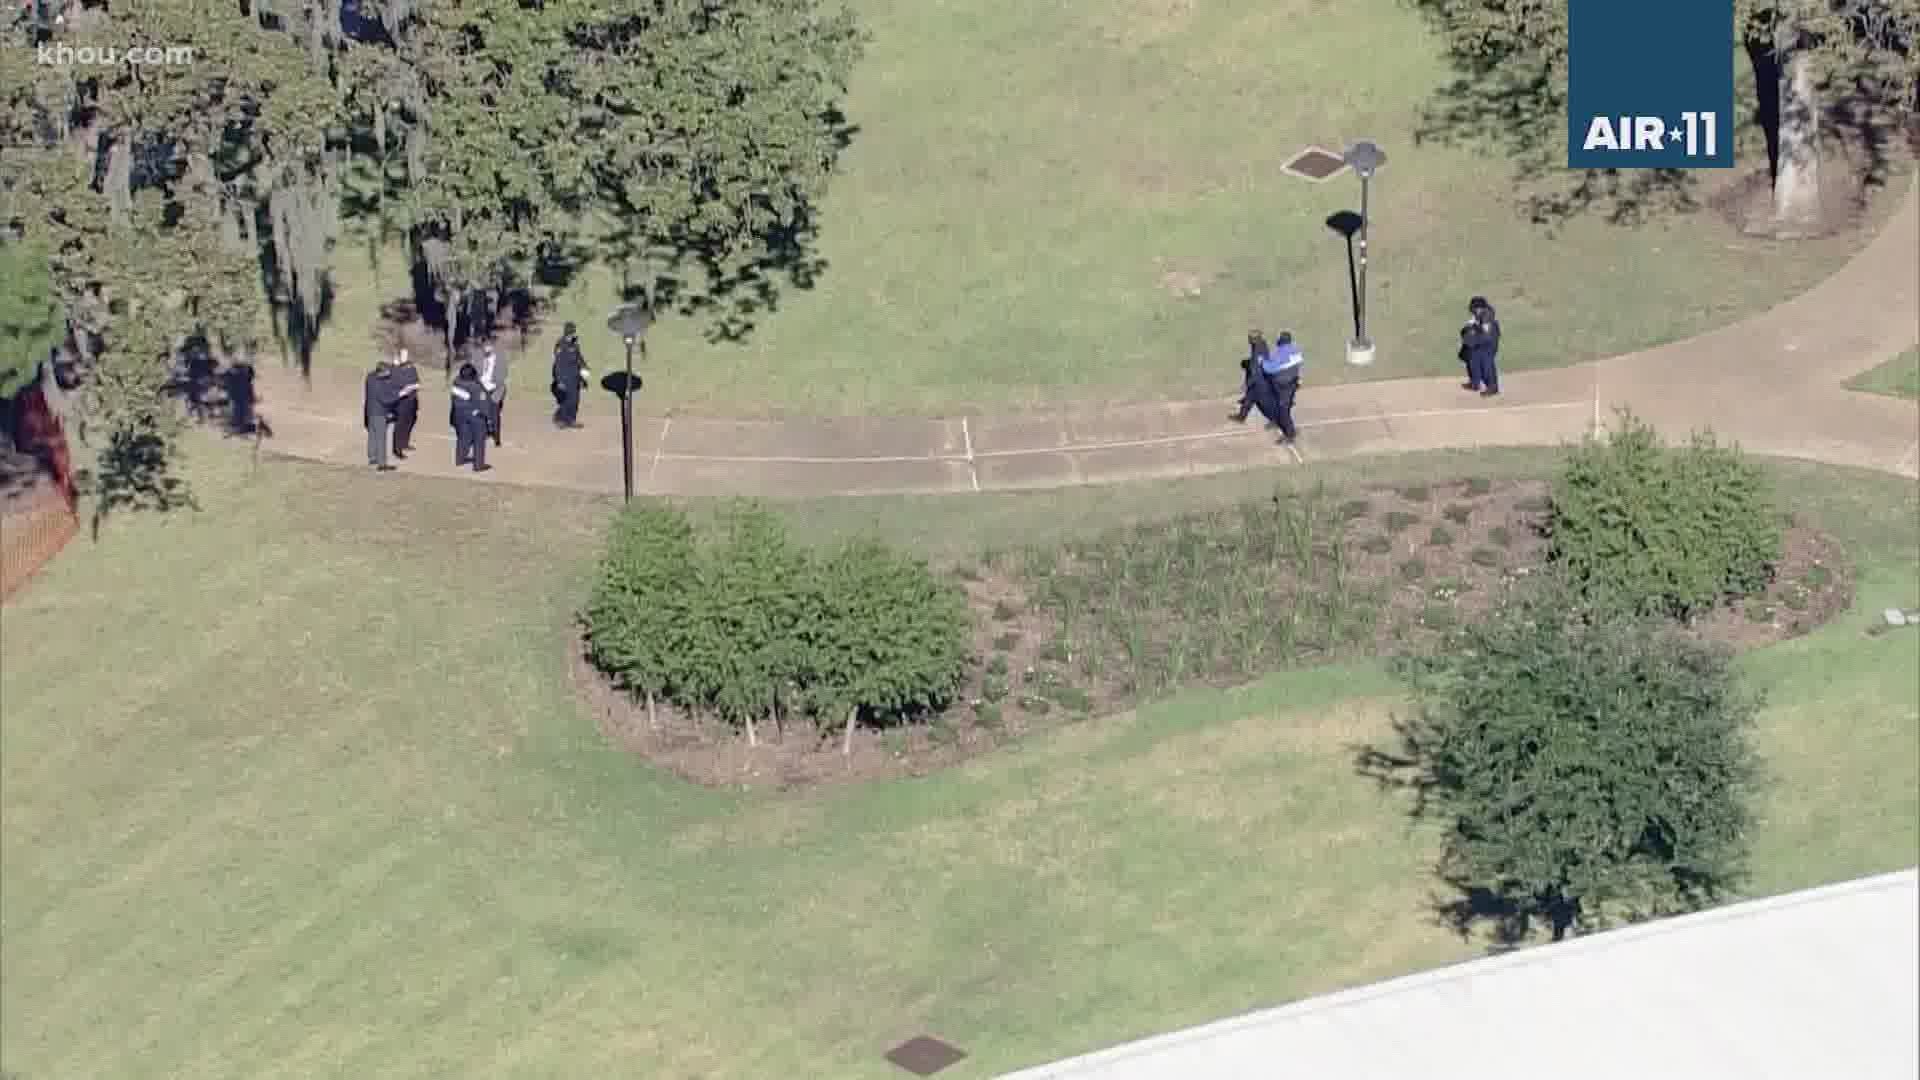 A woman's body was found on the University of Houston's campus Monday morning. Police believe the woman may have been homeless and her death was natural.